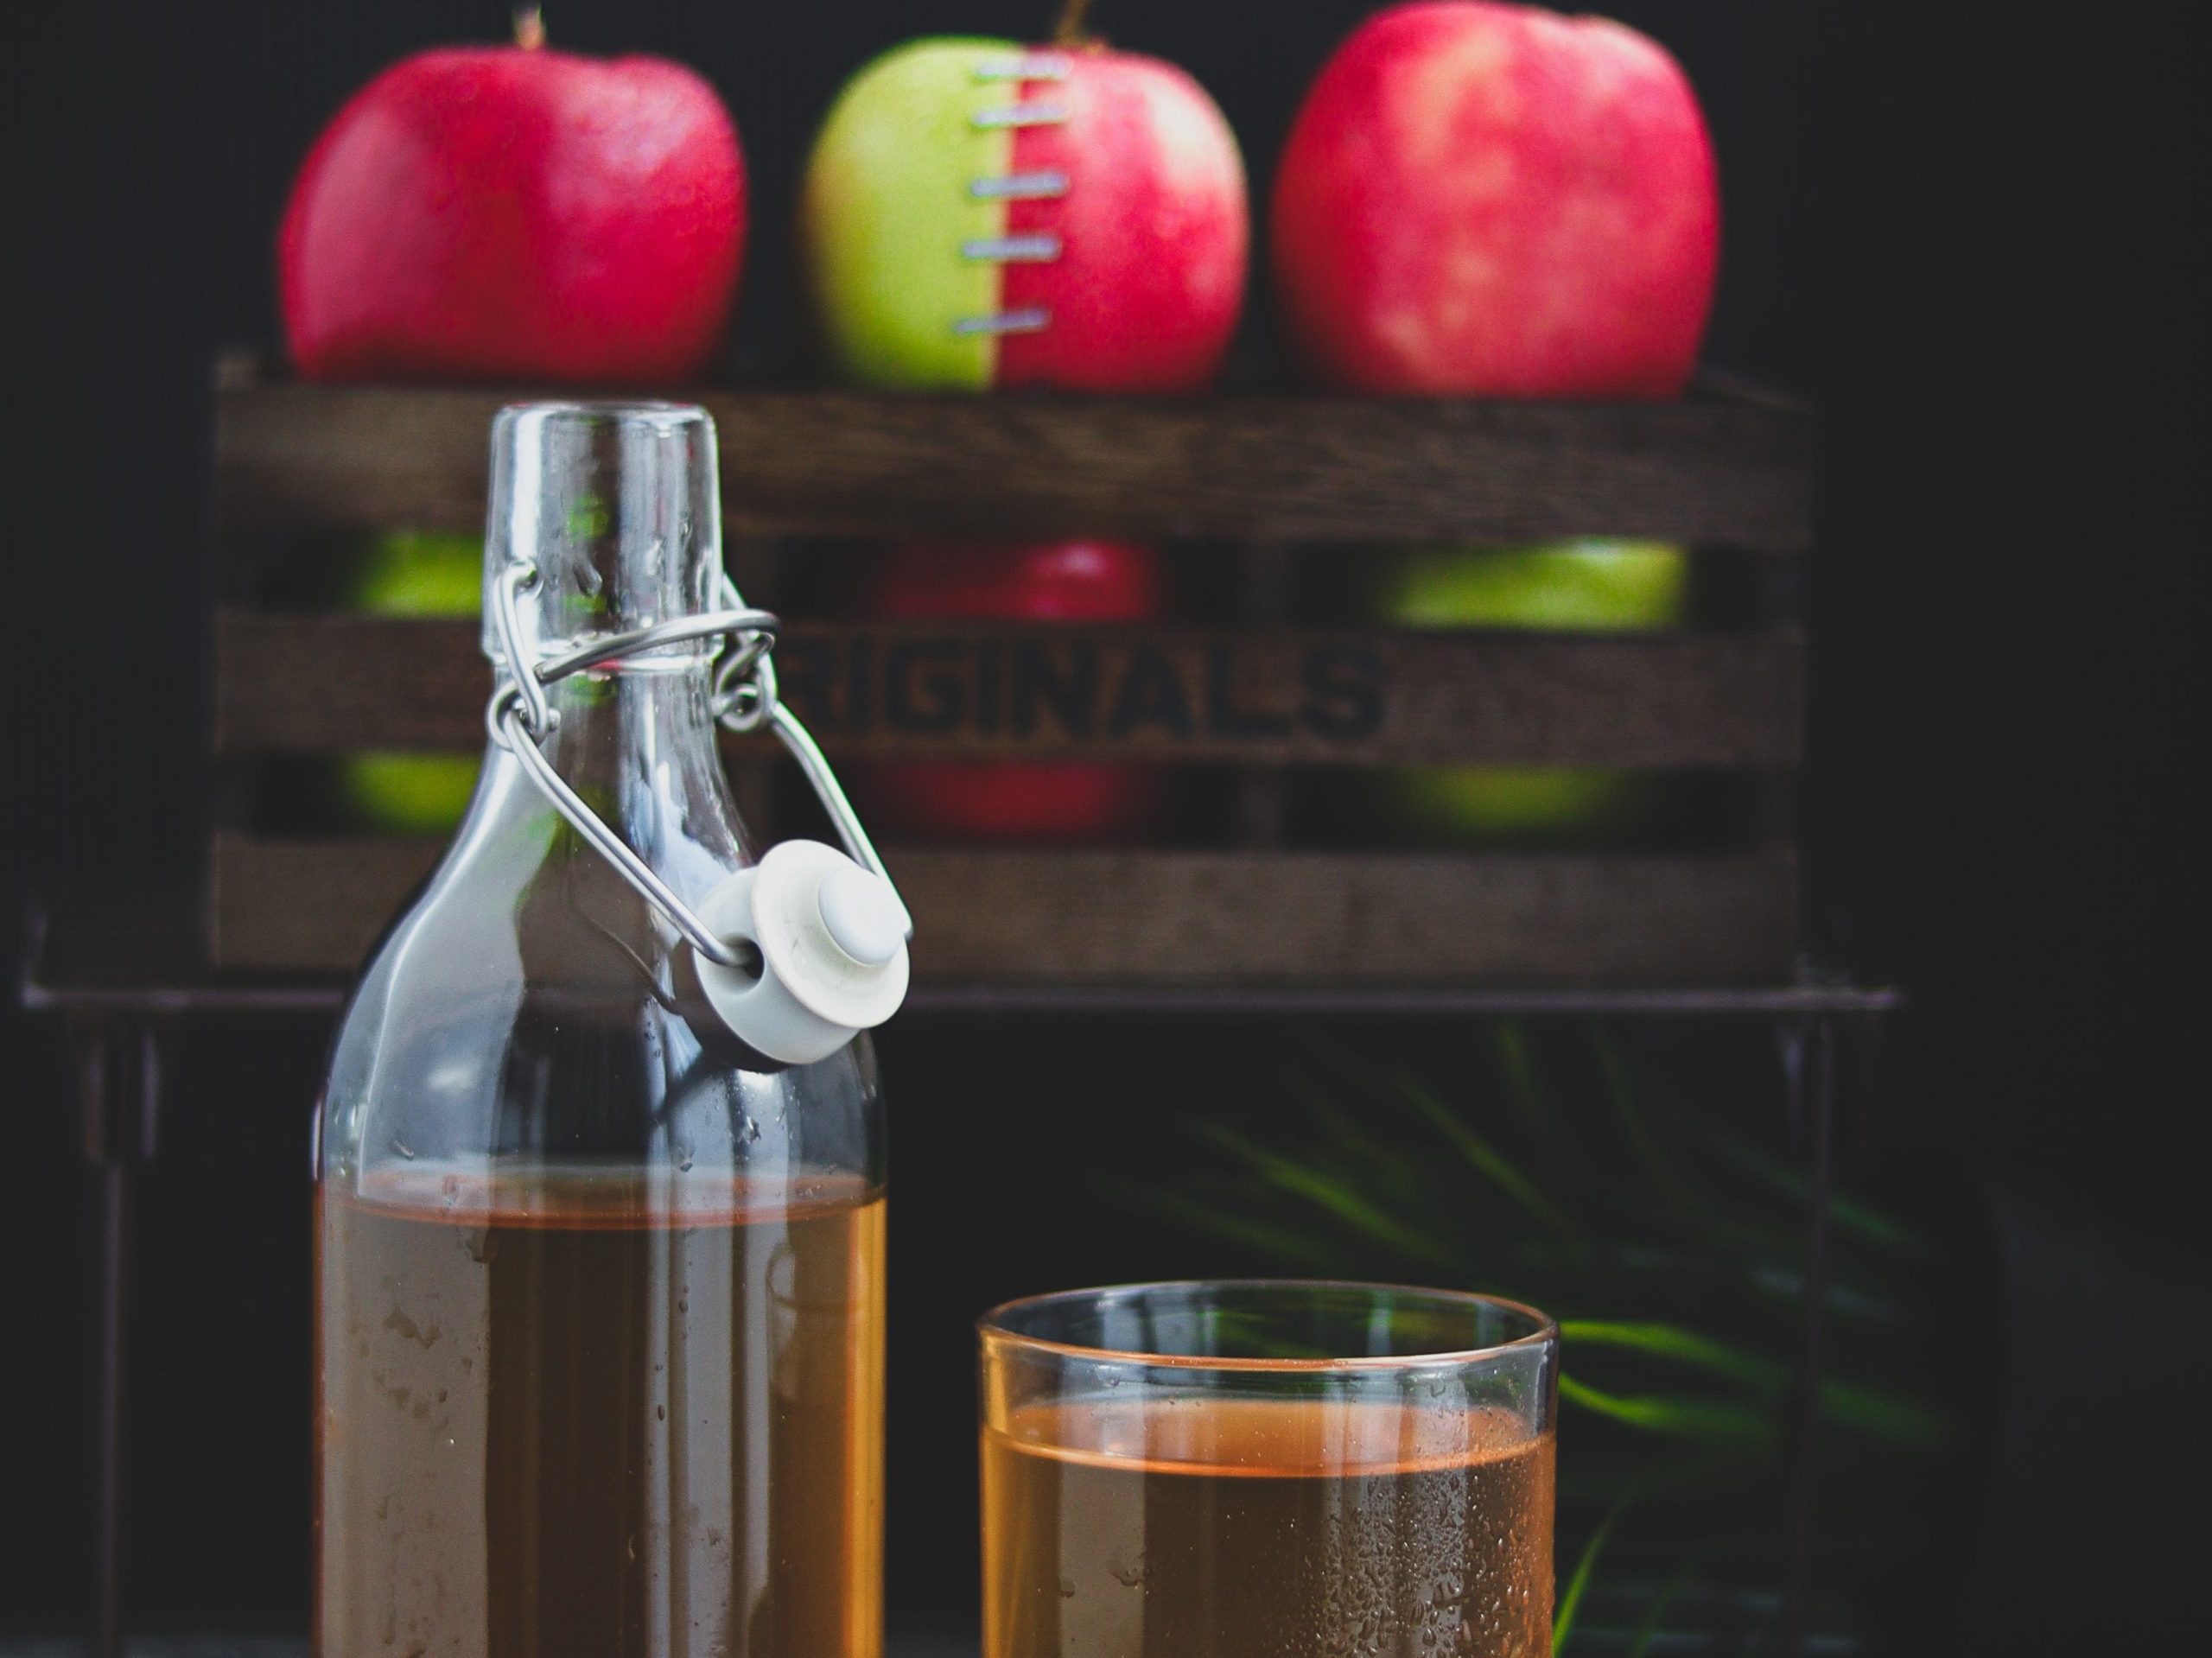 Where To Find Apple Cider In Grocery Store?